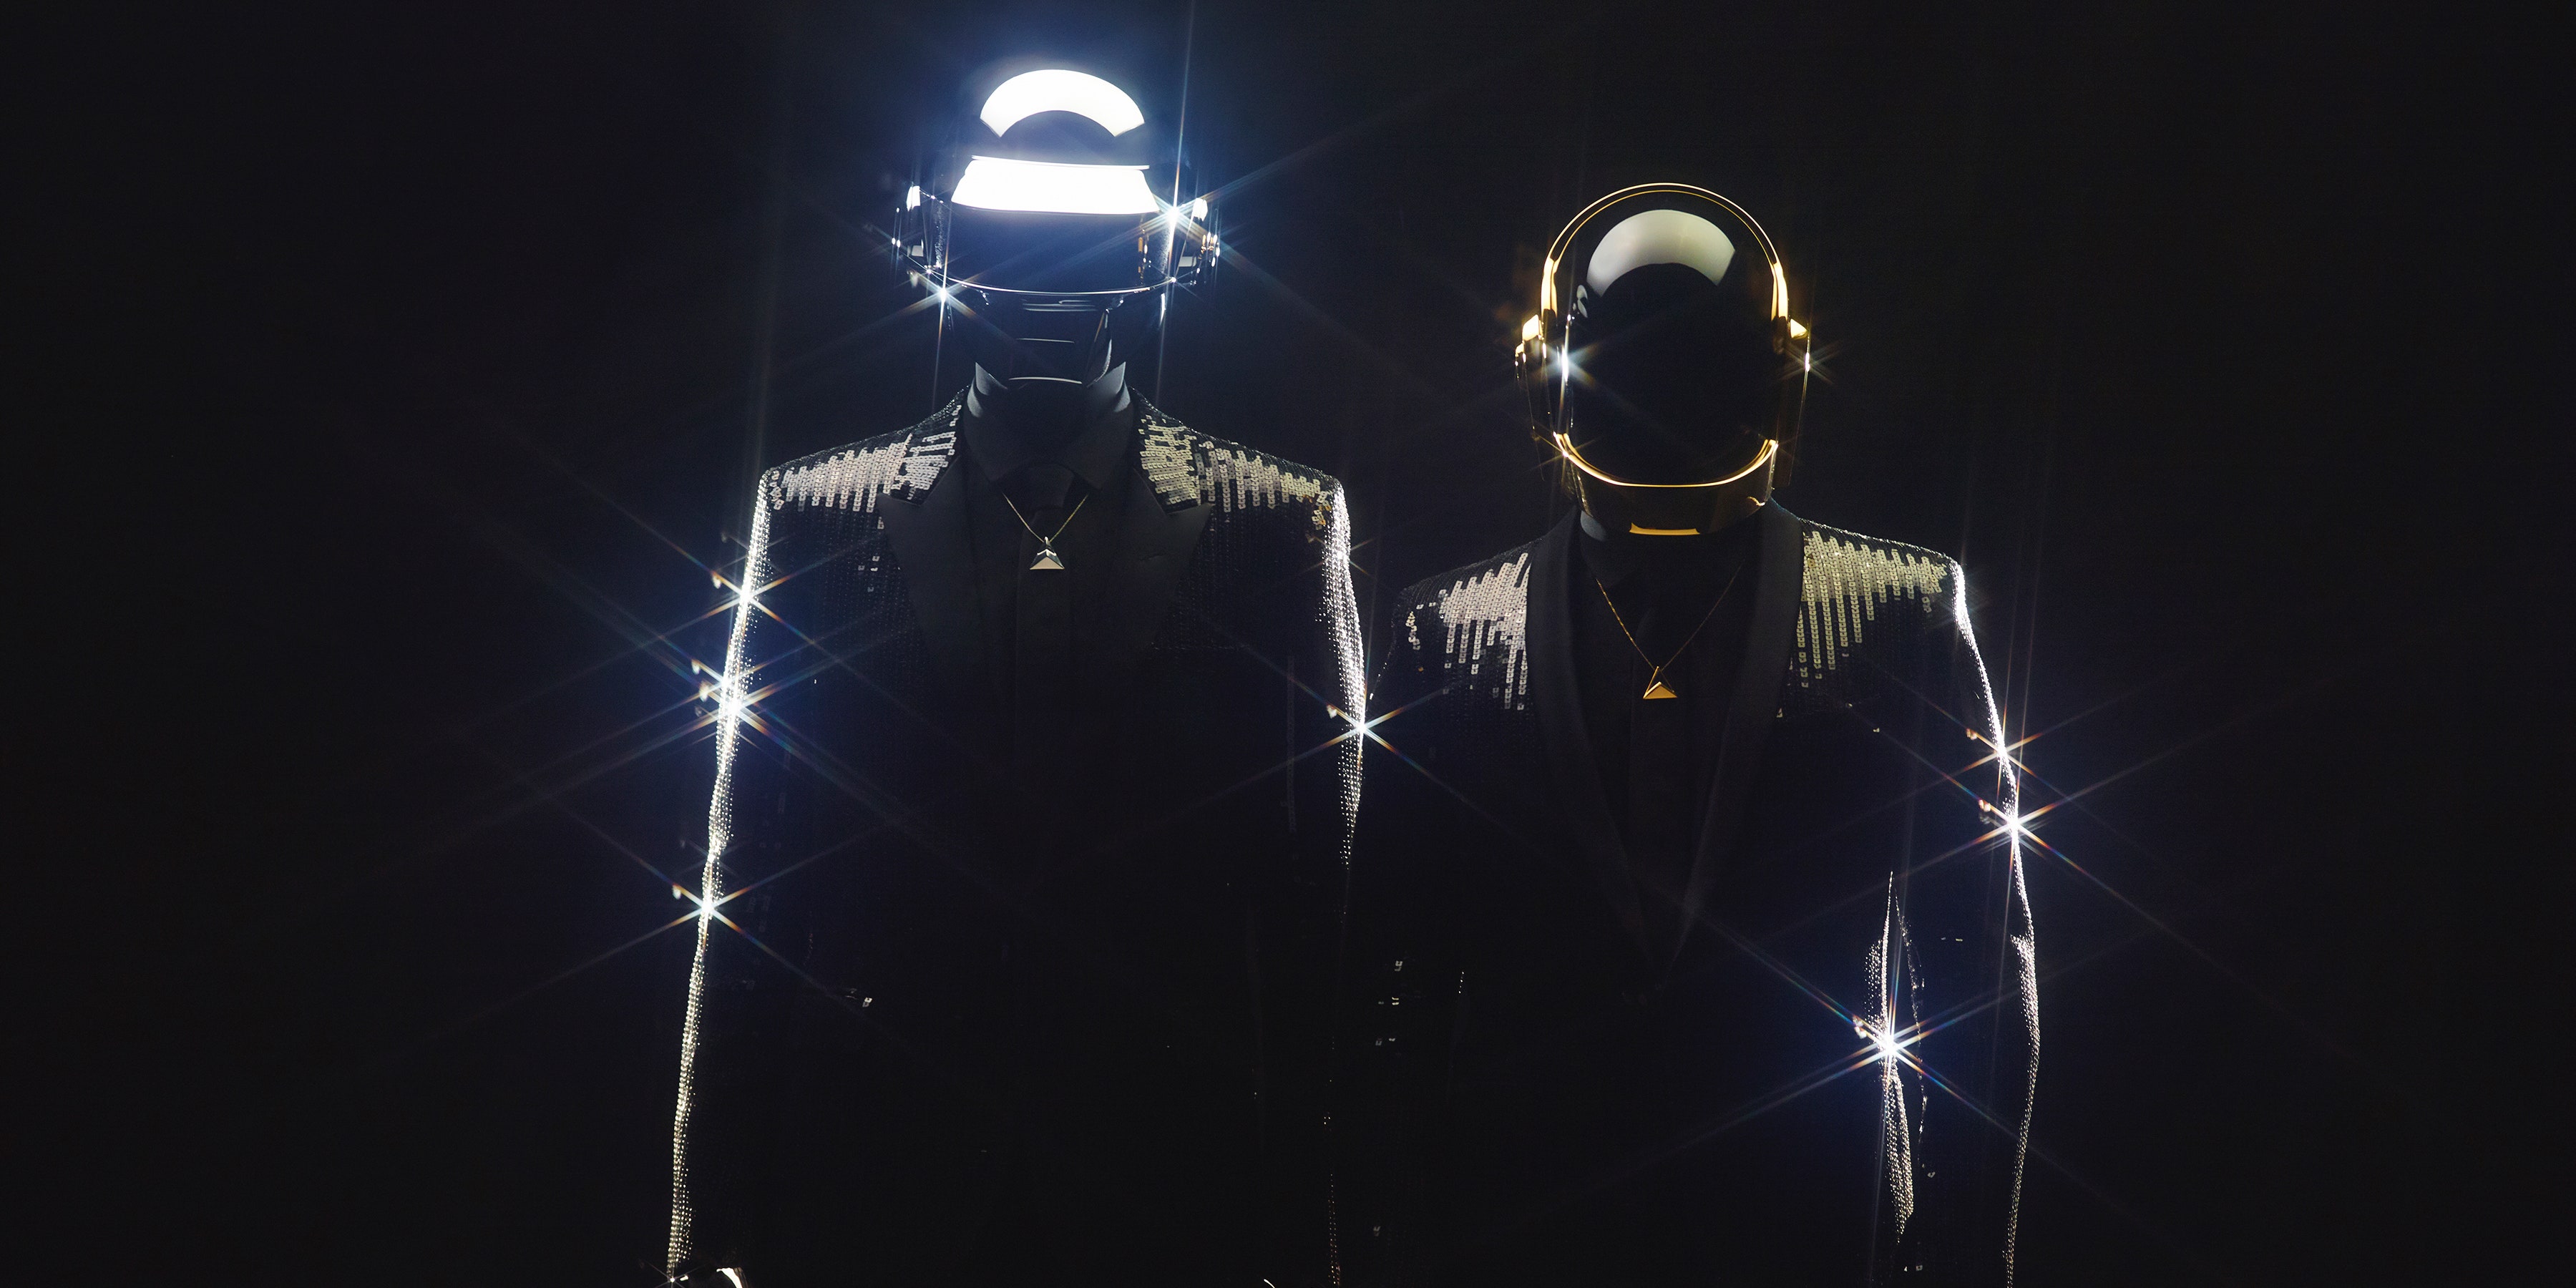 [WATCH] Daft Punk’s Around The World Played On Giant Tesla Coils